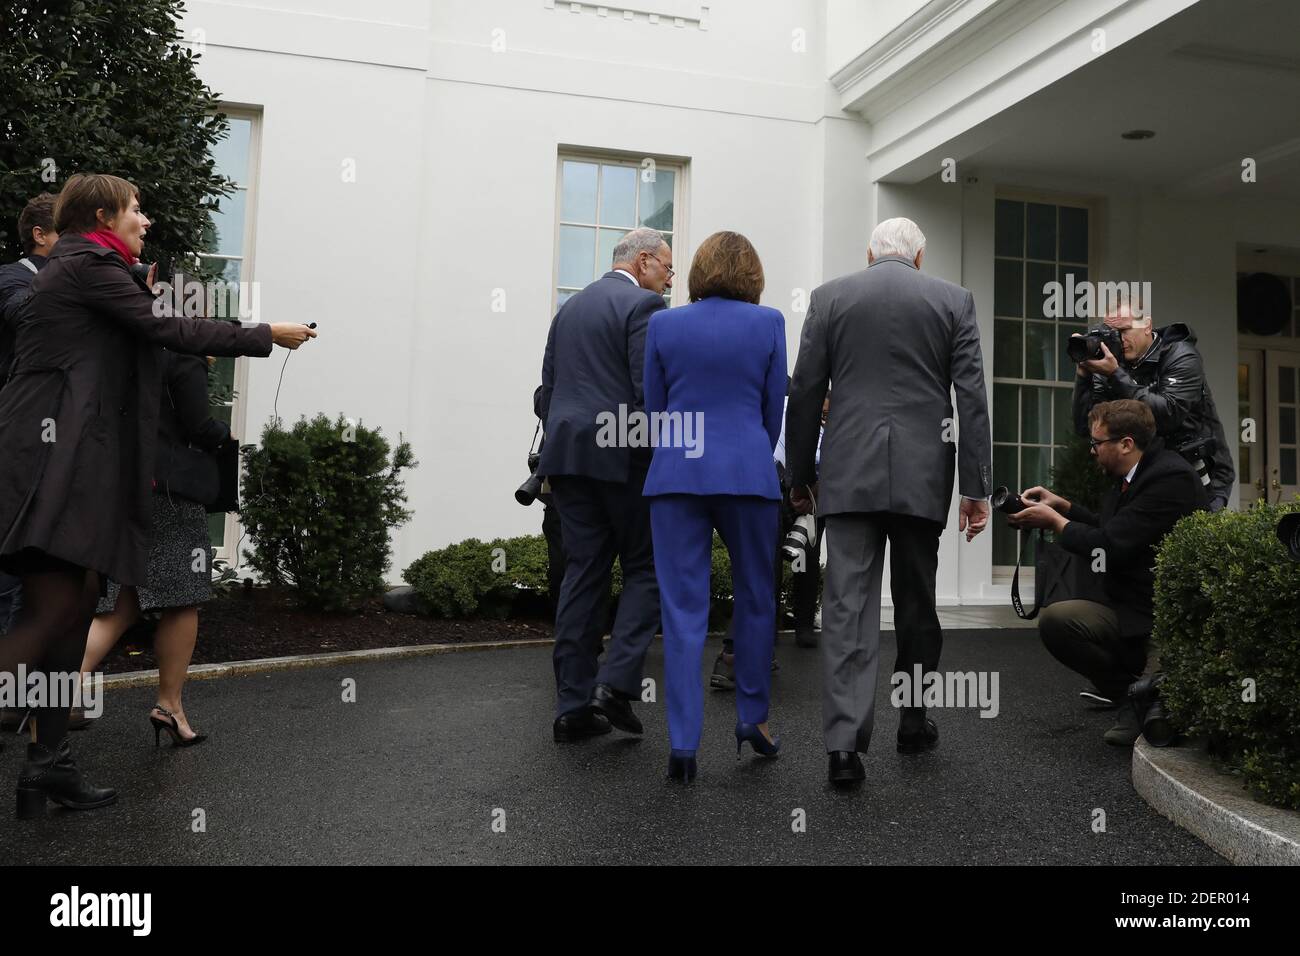 U.S. House Speaker Nancy Pelosi (D-CA) leave with Senate Minority Leader Chuck Schumer (D-NY) (L) and House Majority Leader Steny Hoyer (D-MD) after speaking to the media following their meeting with President Donald Trump on the situation with Turkey at the White House in Washington on October 16, 2019. Photo by Yuri Gripas/ABACAPRESS.COM Stock Photo